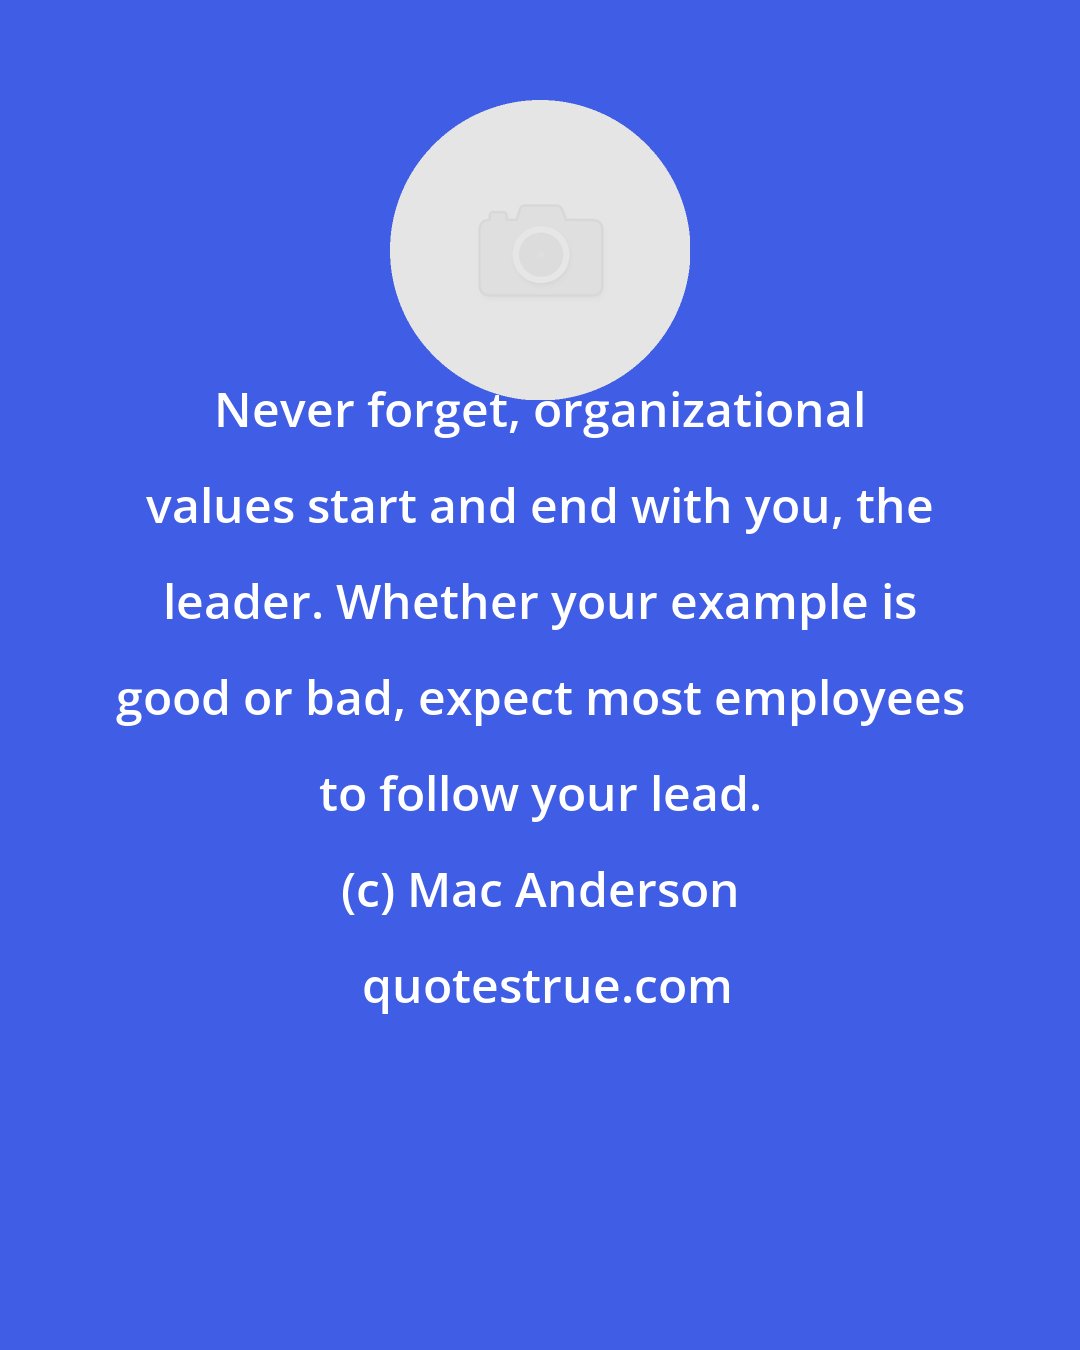 Mac Anderson: Never forget, organizational values start and end with you, the leader. Whether your example is good or bad, expect most employees to follow your lead.